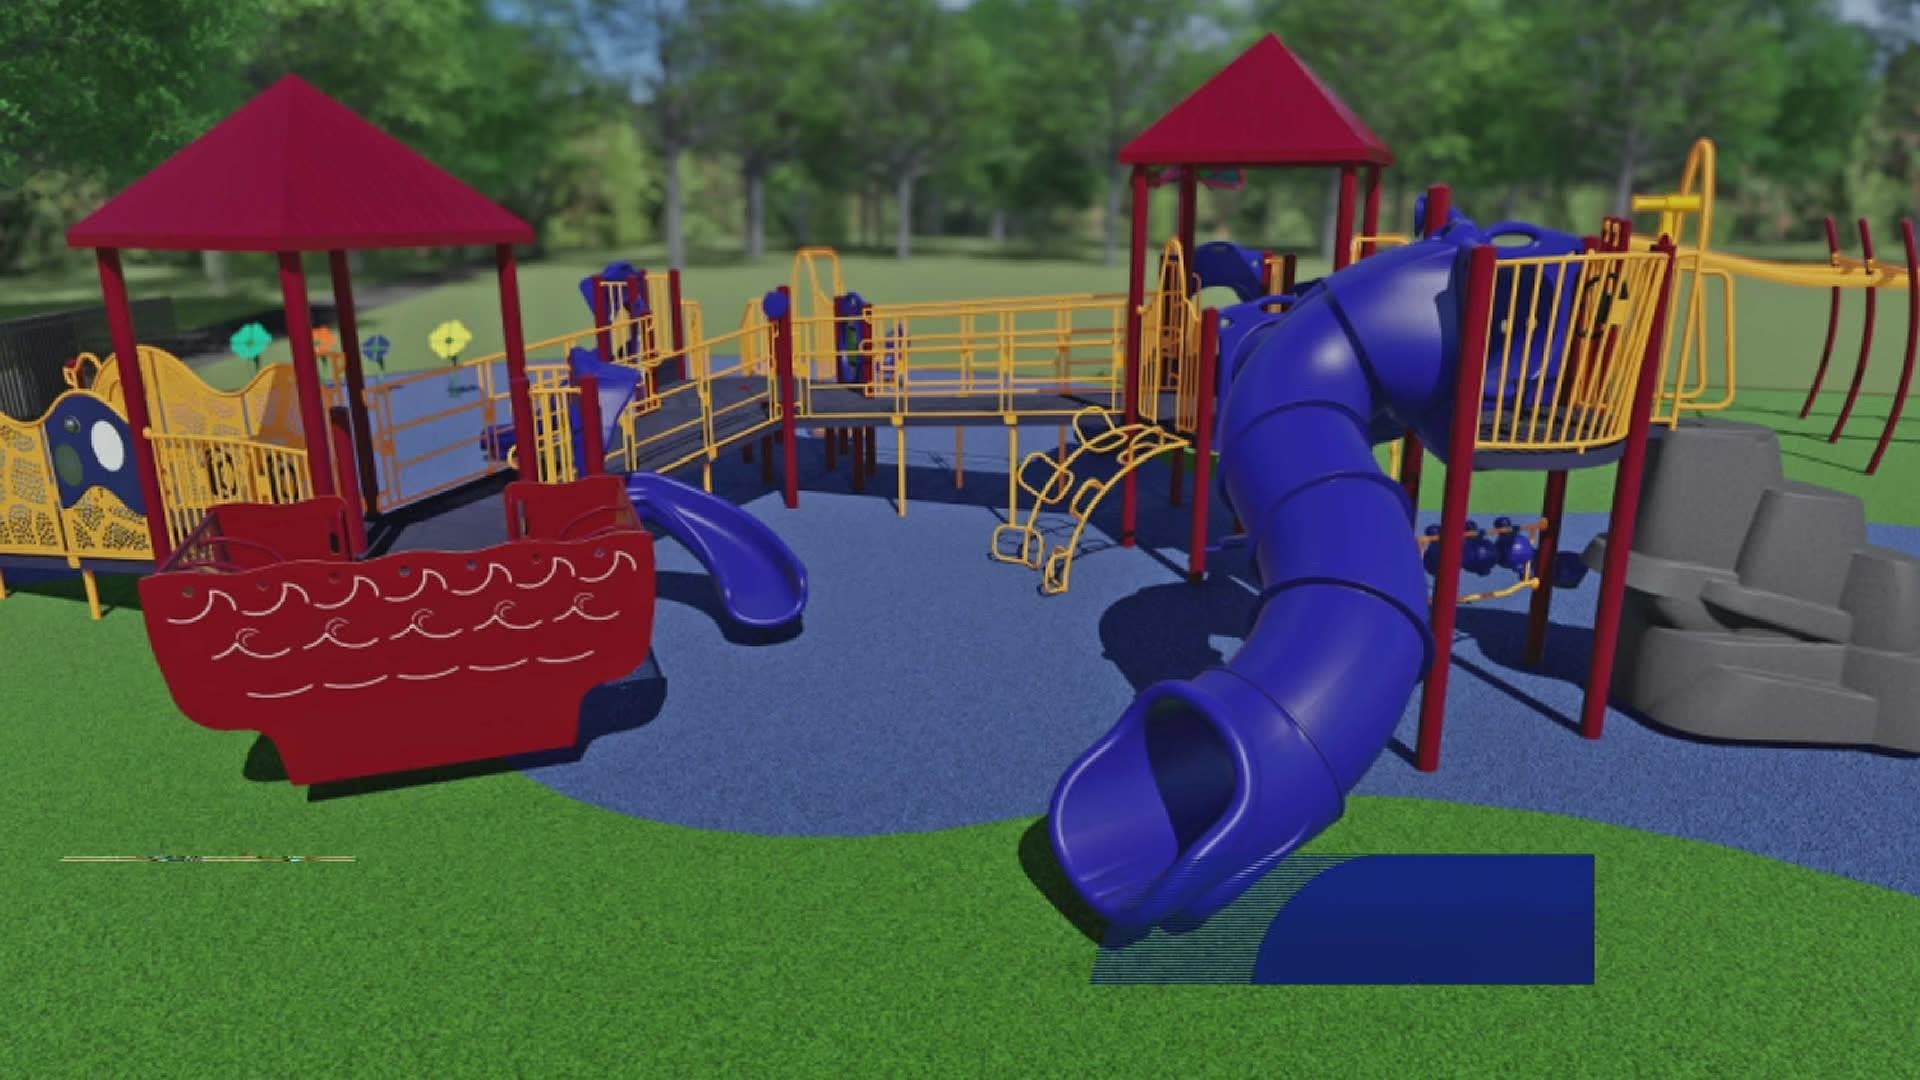 New event hits Pottsville to help build all-inclusive playground for kids